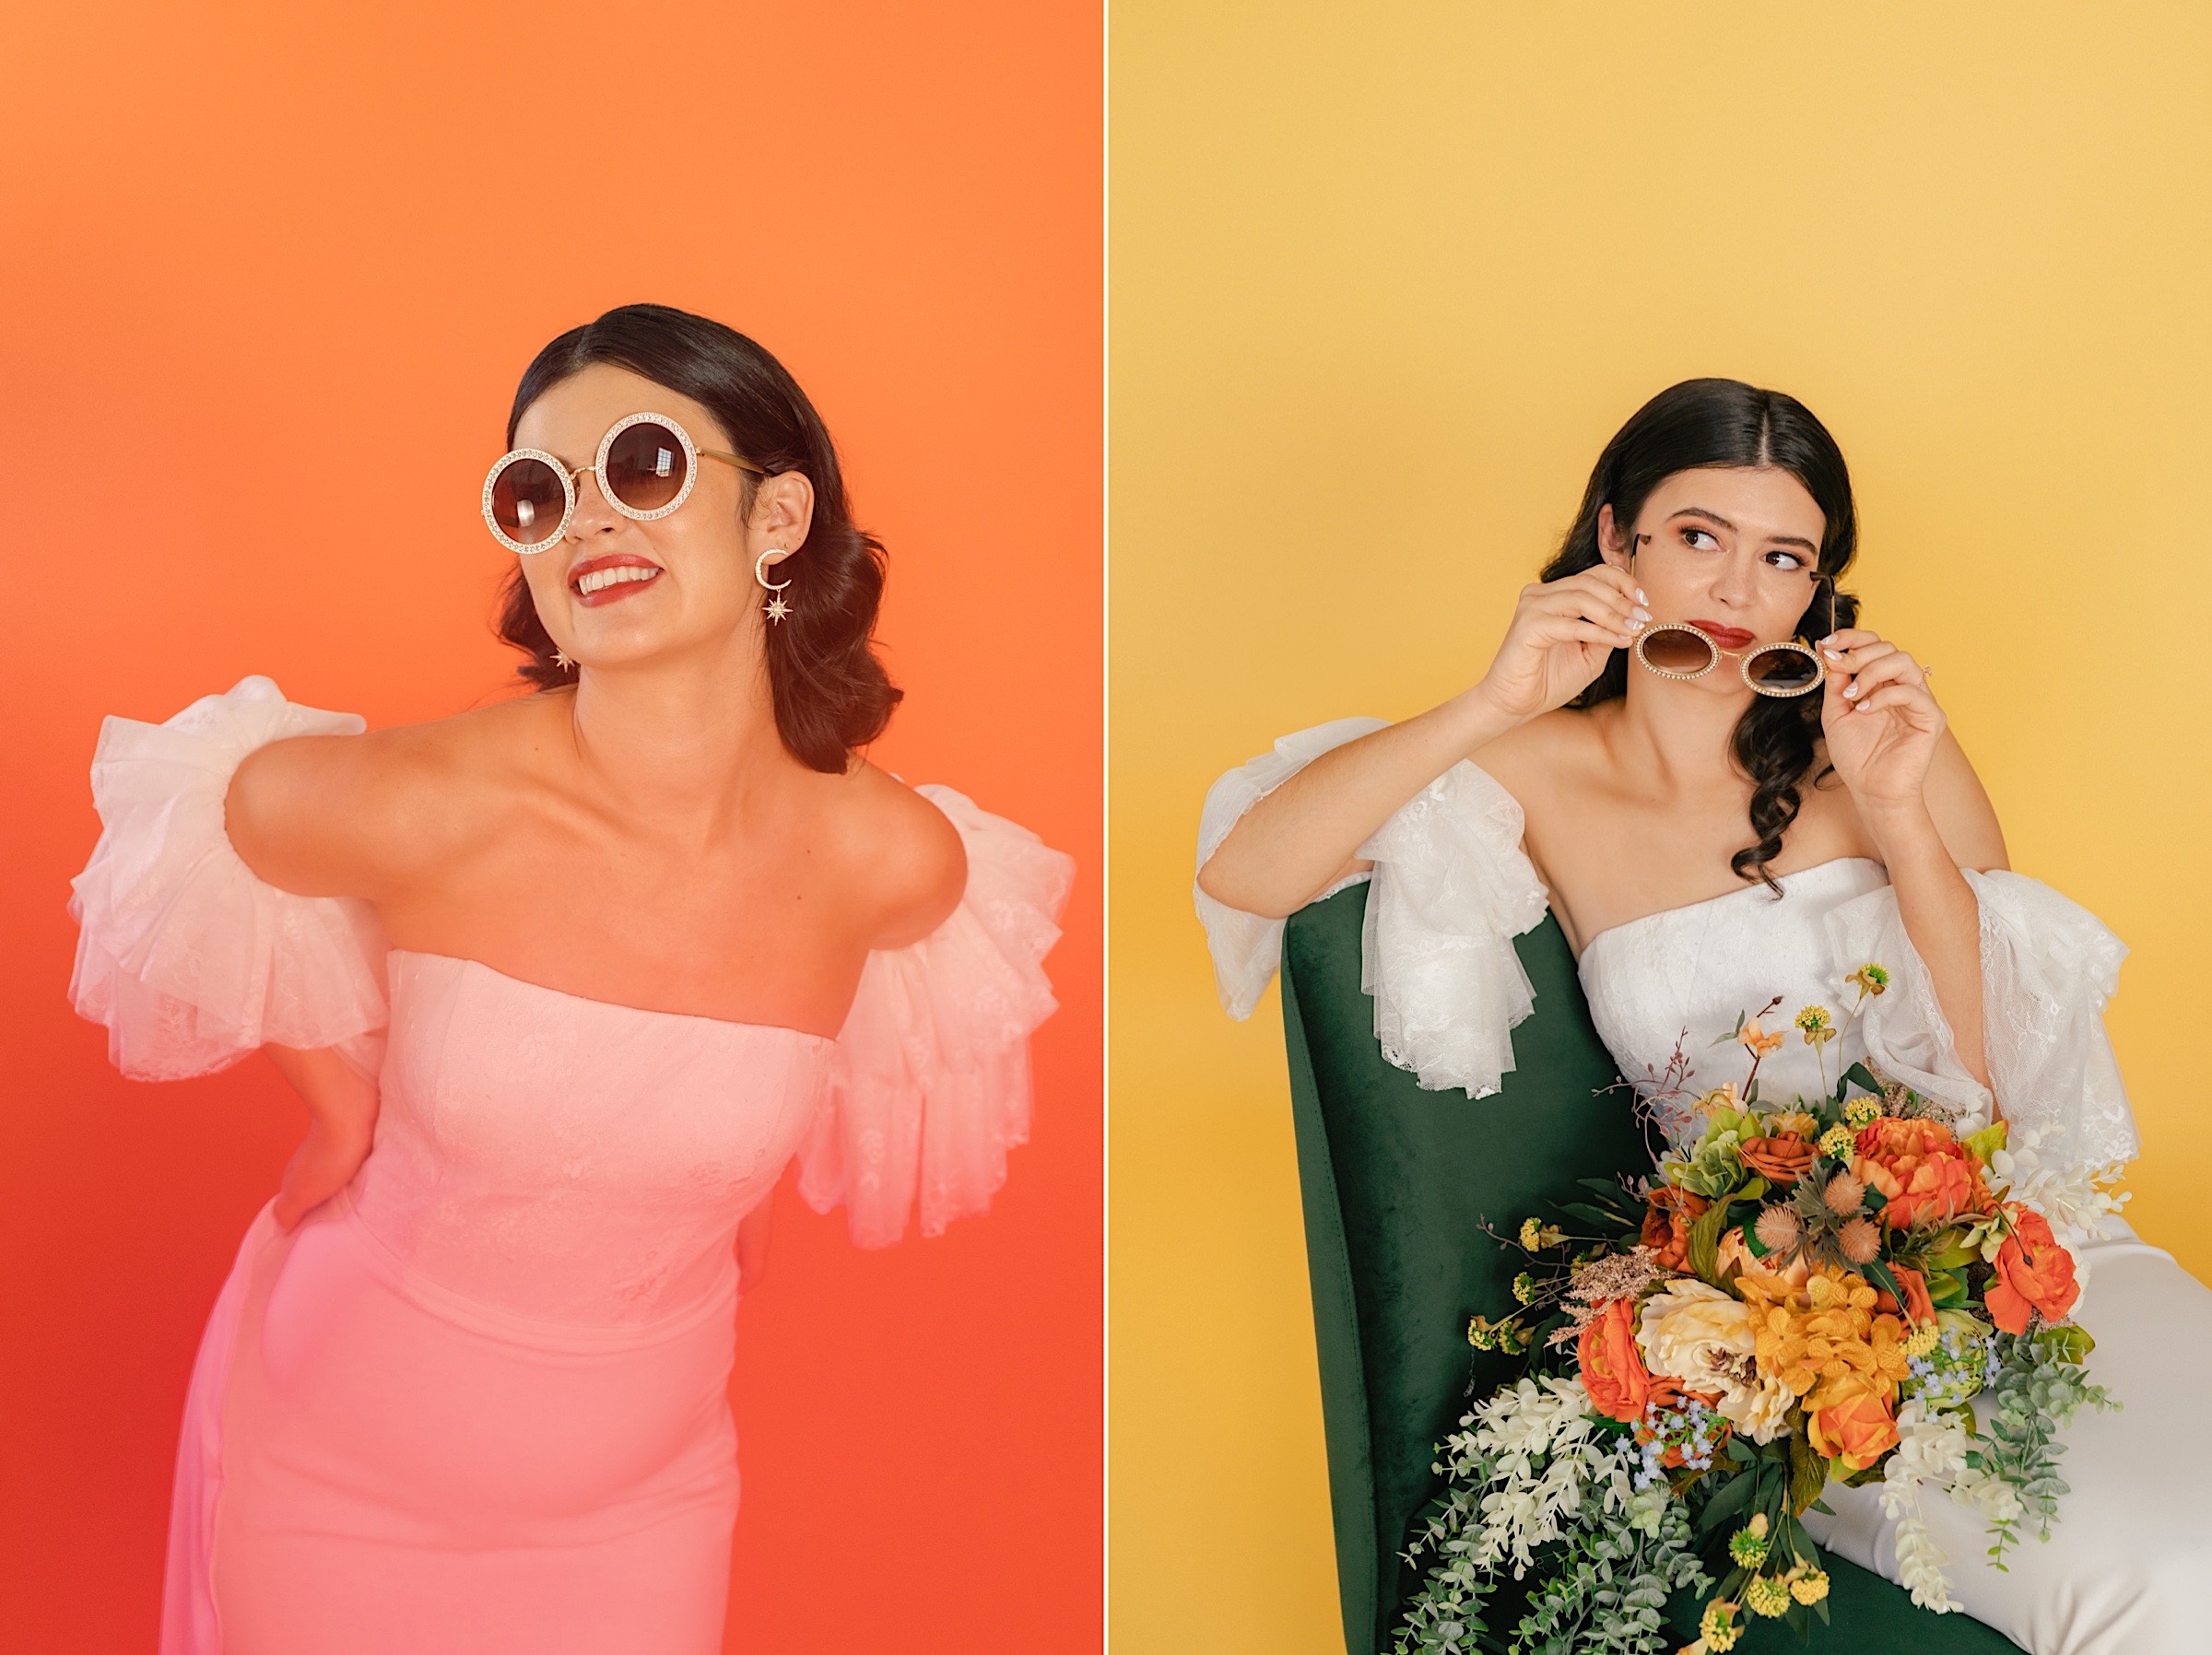 styled-studio-bridal-photos-session-wedding-photographer-colorful-bold-unique-modern-bride-orange-green-yellow-backdrop-color-palette-hipster